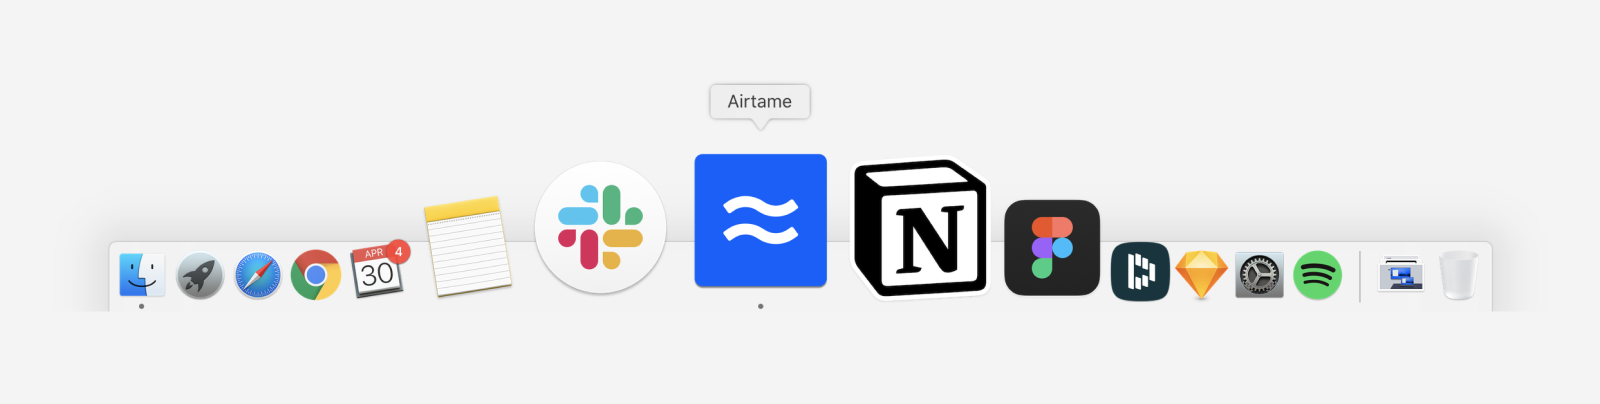 Airtame icon on the macOS dock